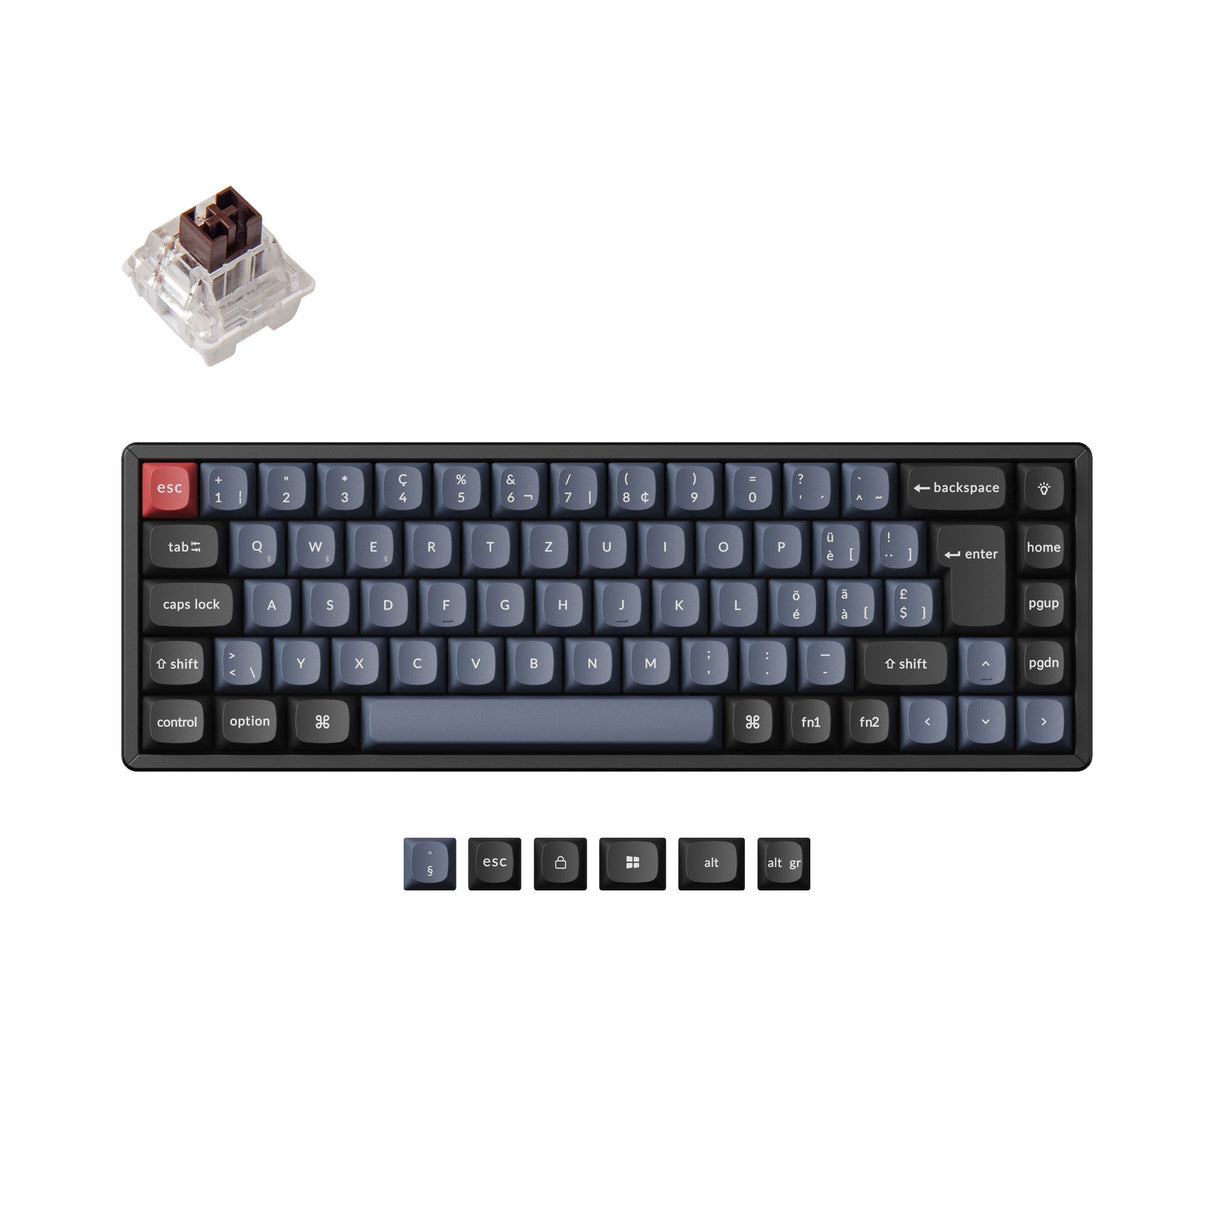 Keychron K6 Pro QMK/VIA Wireless Custom Mechanical Keyboard with 65% layout for Mac Windows Linux hot-swappable with MX switch RGB backlight Swiss ISO Layout PBT